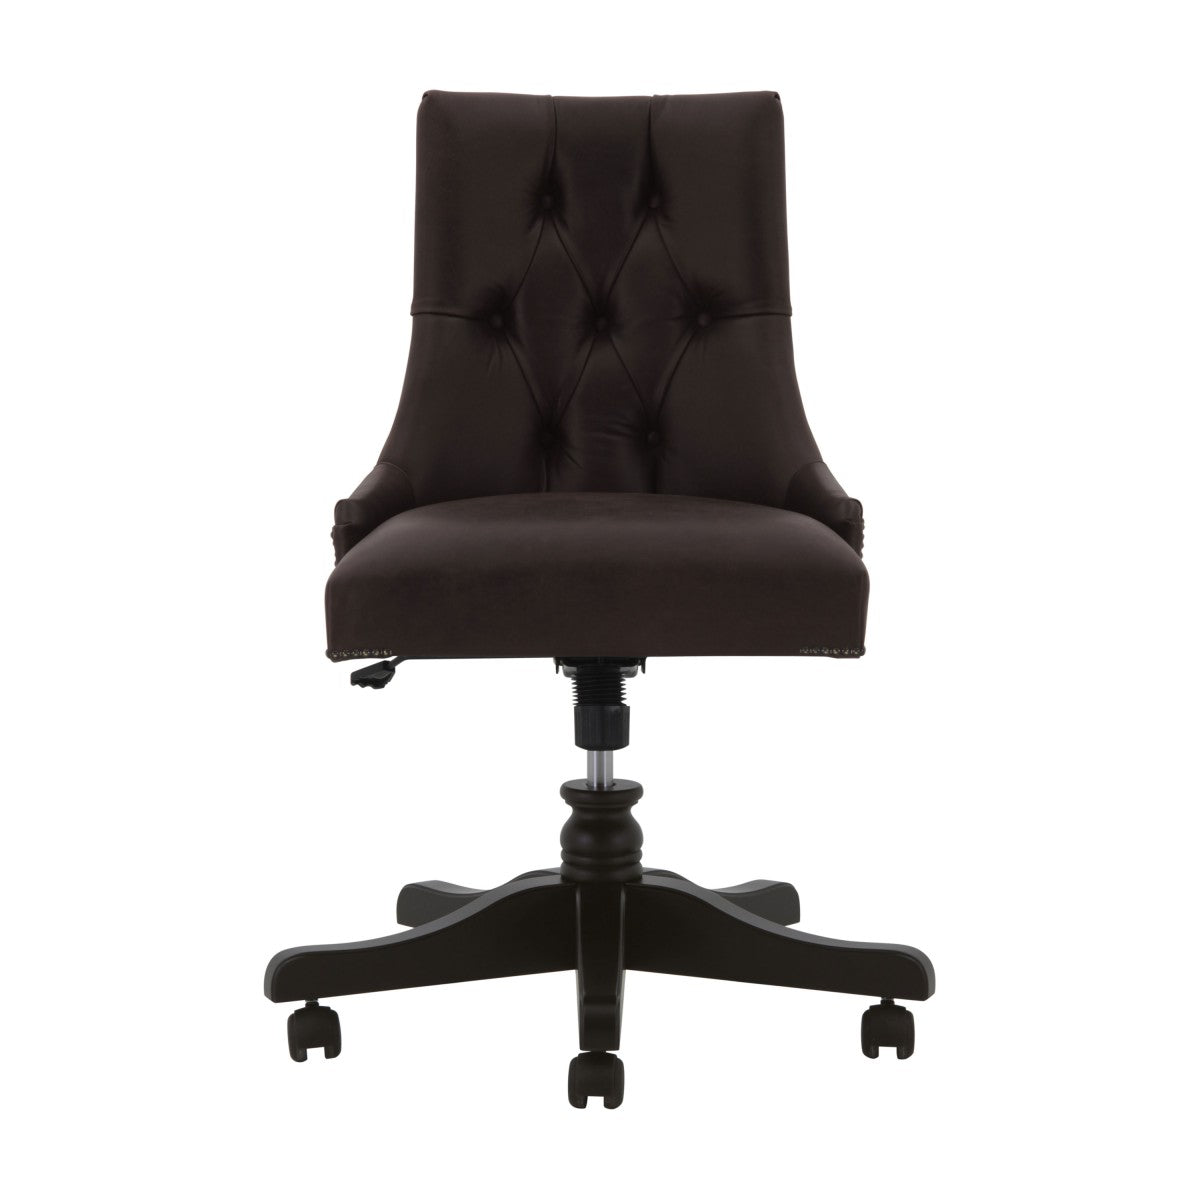 Edward Low Arm Bespoke Upholstered Luxury Executive Swivel Office Desk Chair MS810S Custom Made To Order